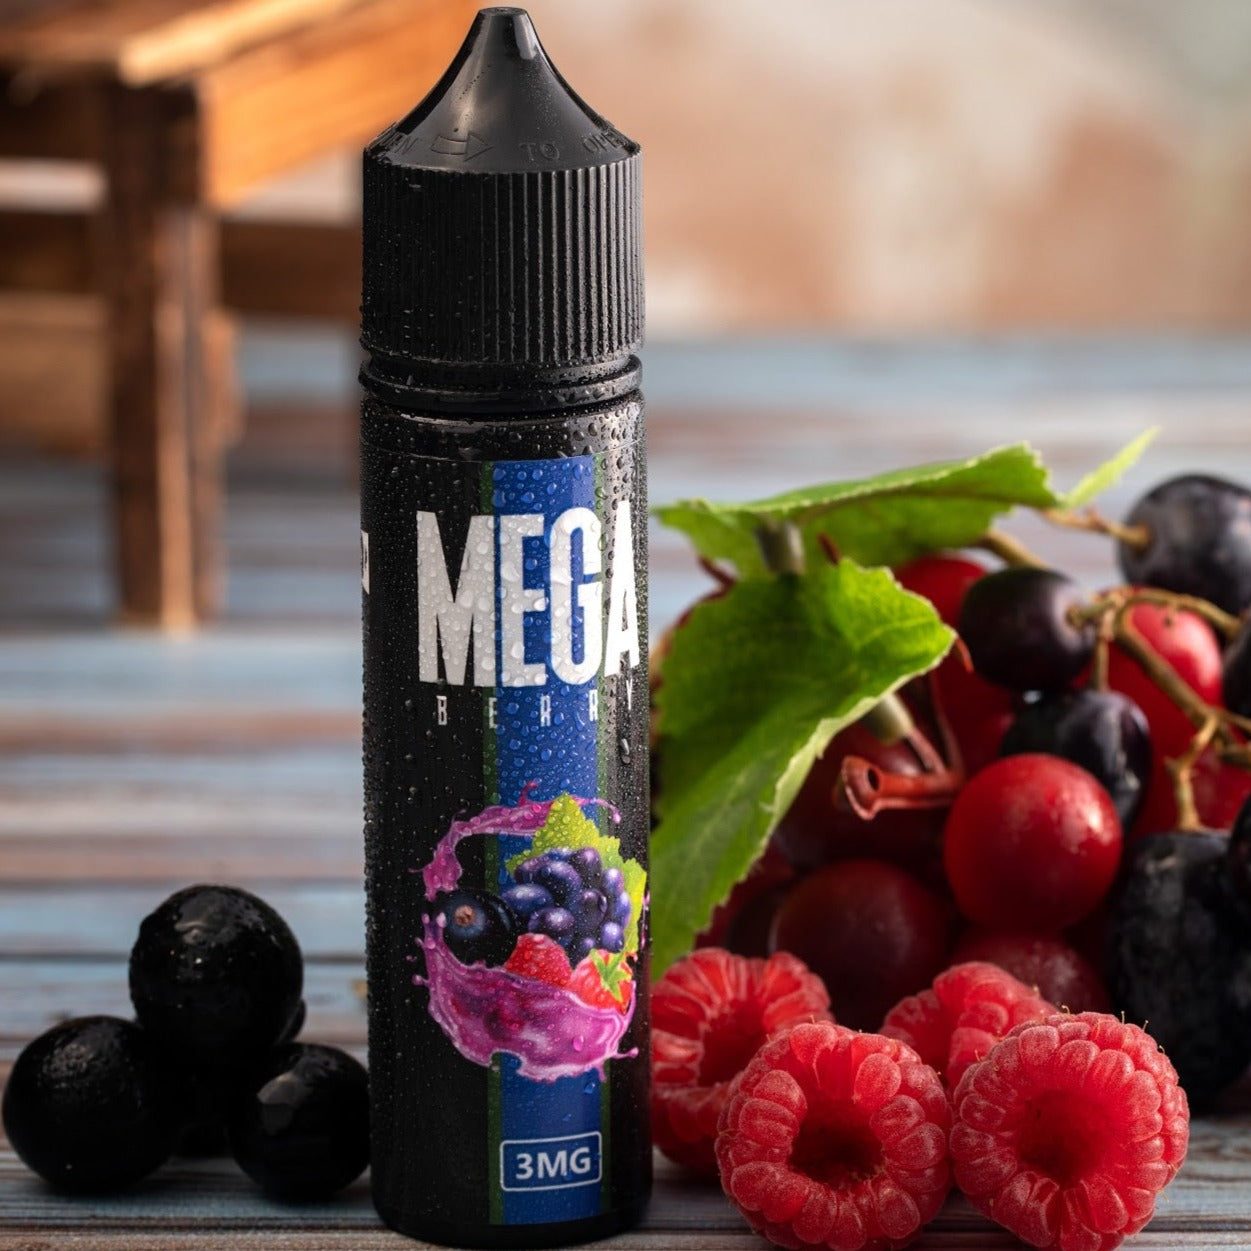 Mega Berry by GRAND - An exquisite blend of ripe berries in e-liquid form, perfect for a fruity vaping experience